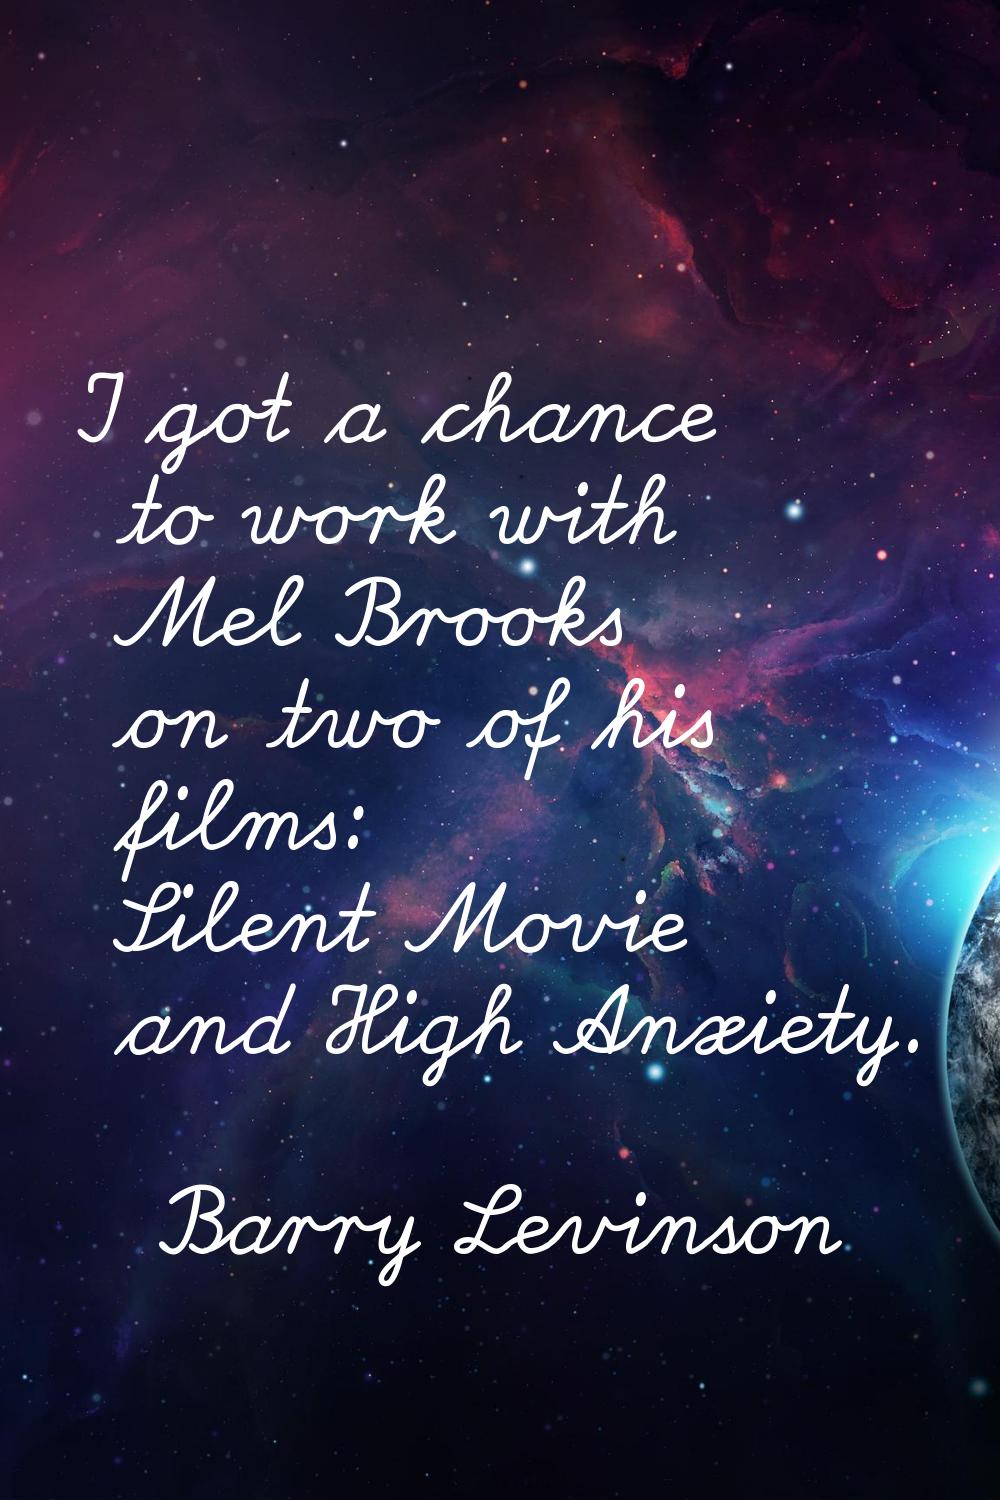 I got a chance to work with Mel Brooks on two of his films: Silent Movie and High Anxiety.